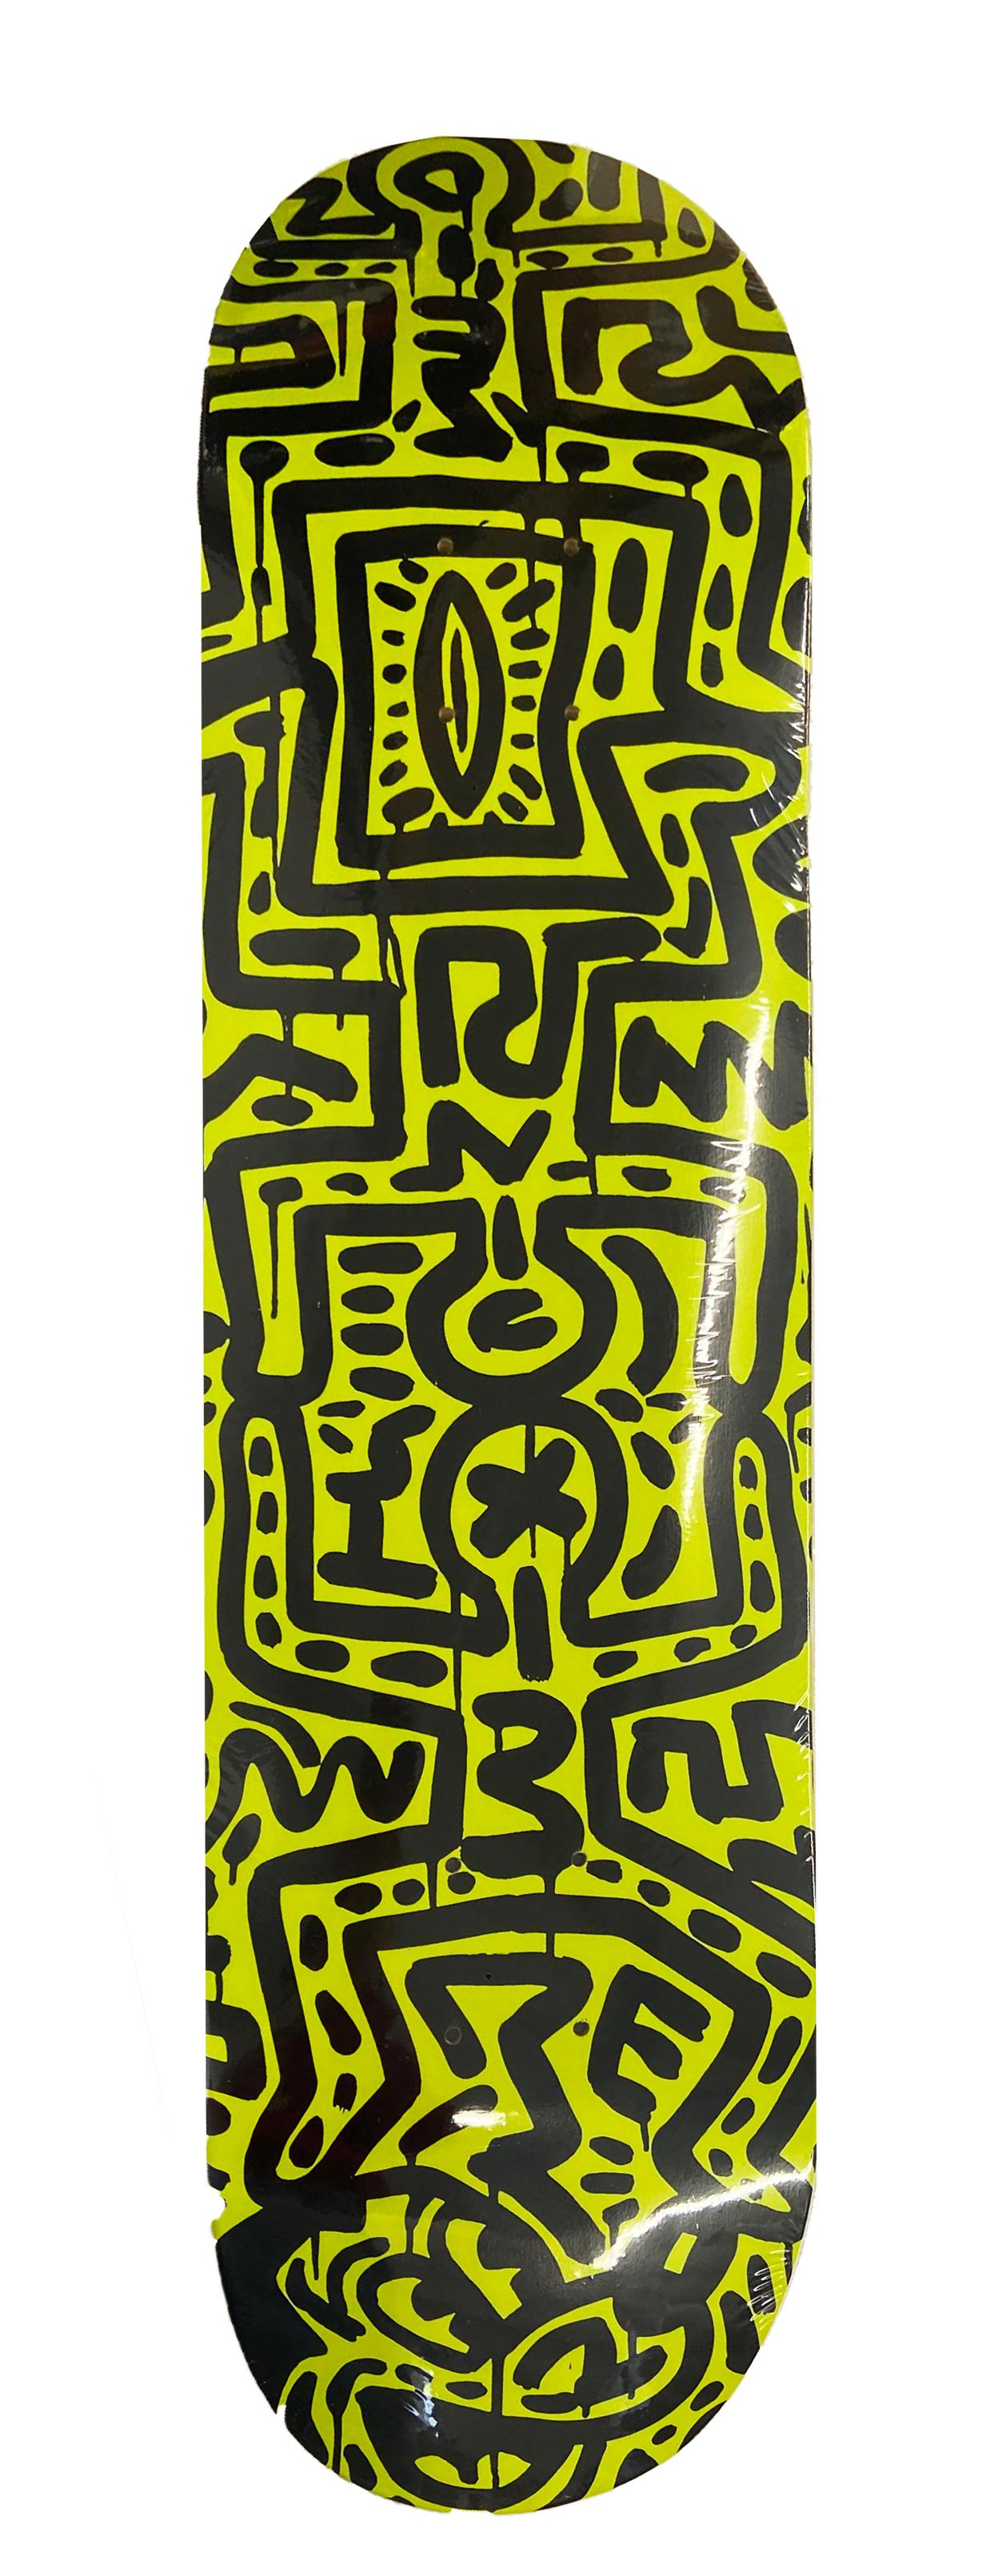 Keith Haring Skateboard Deck  - Sculpture by (after) Keith Haring